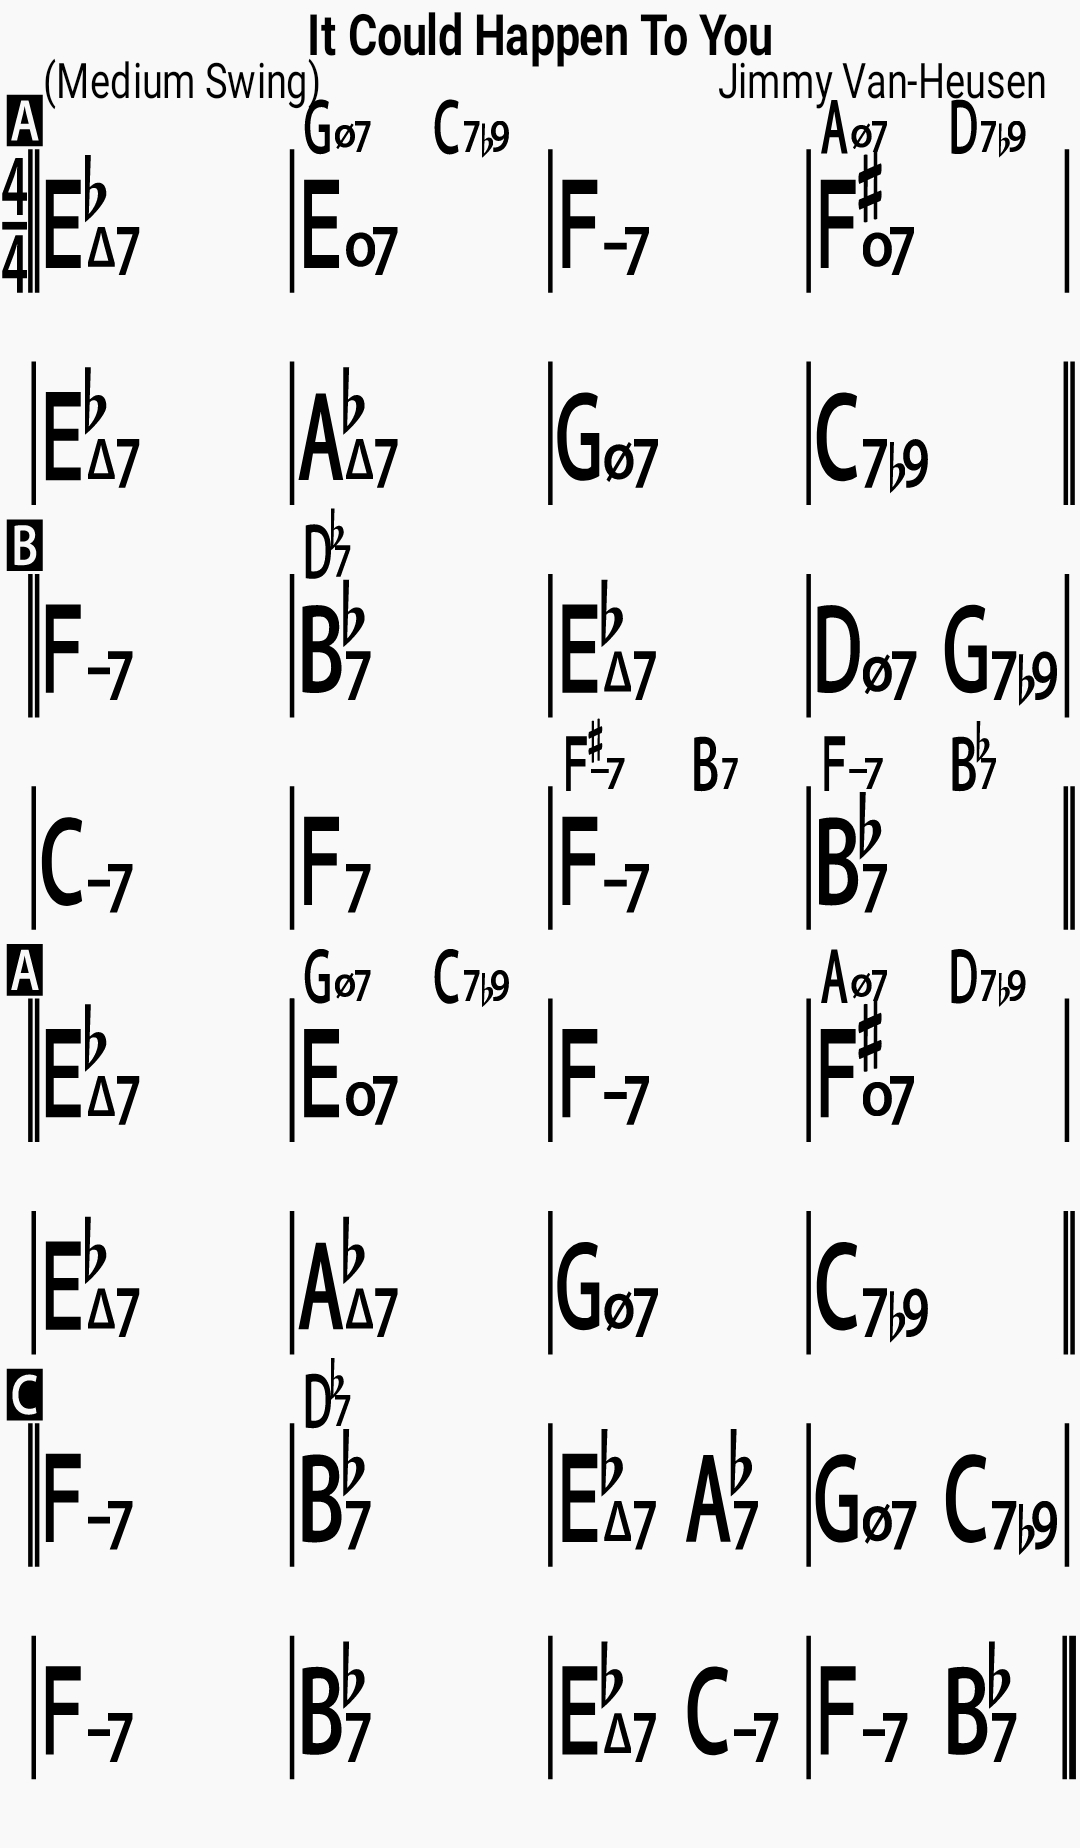 Chord chart for the jazz standard It Could Happen To You